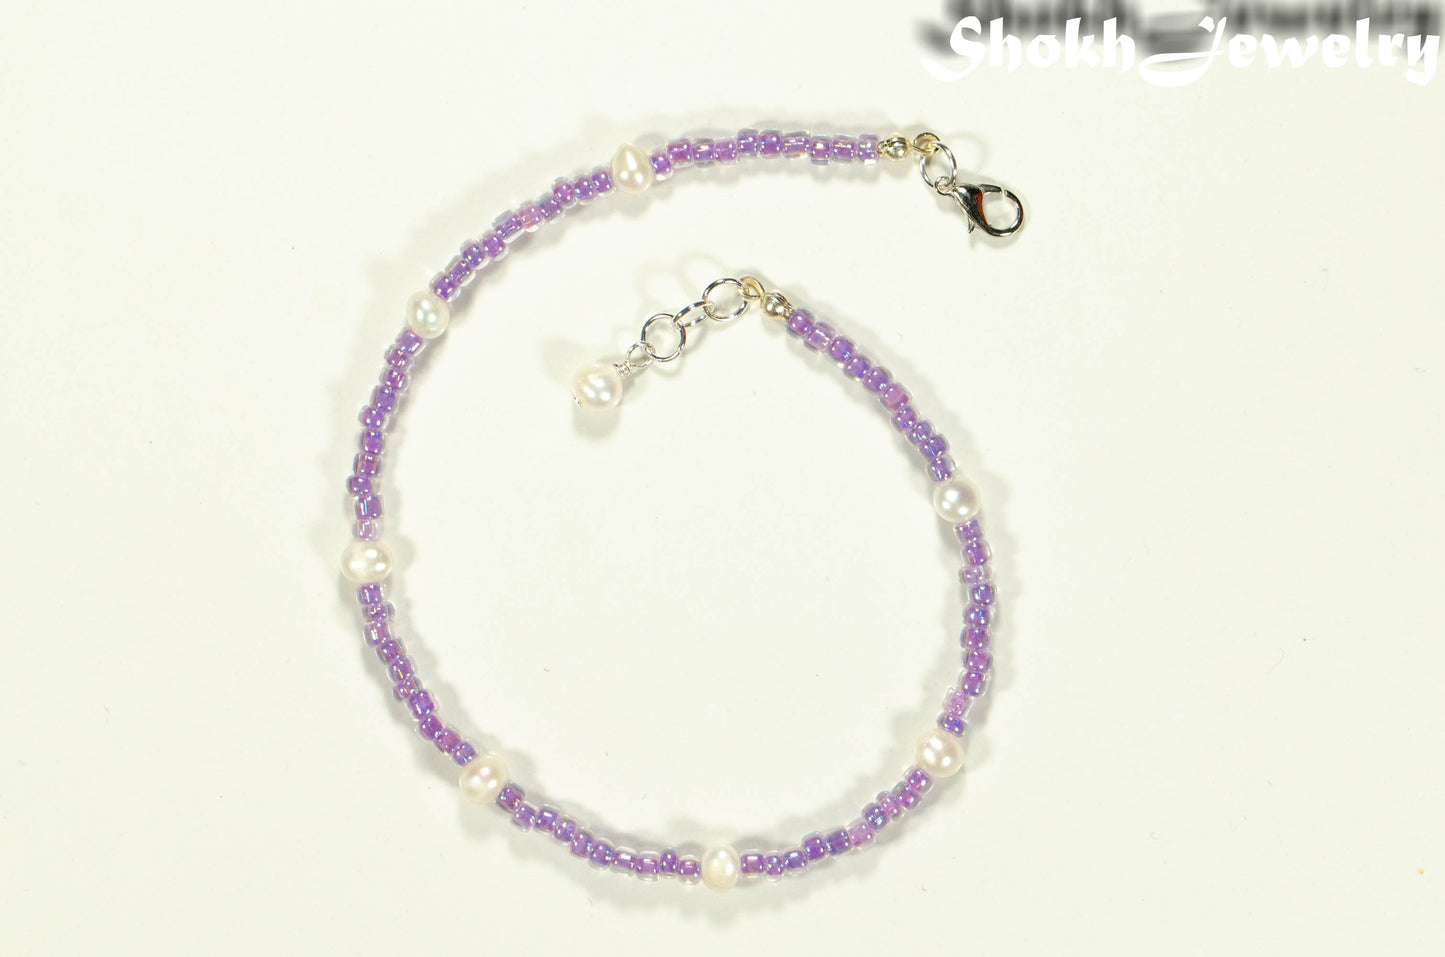 Top view of Freshwater Pearl and Purple Seed Bead Anklet.